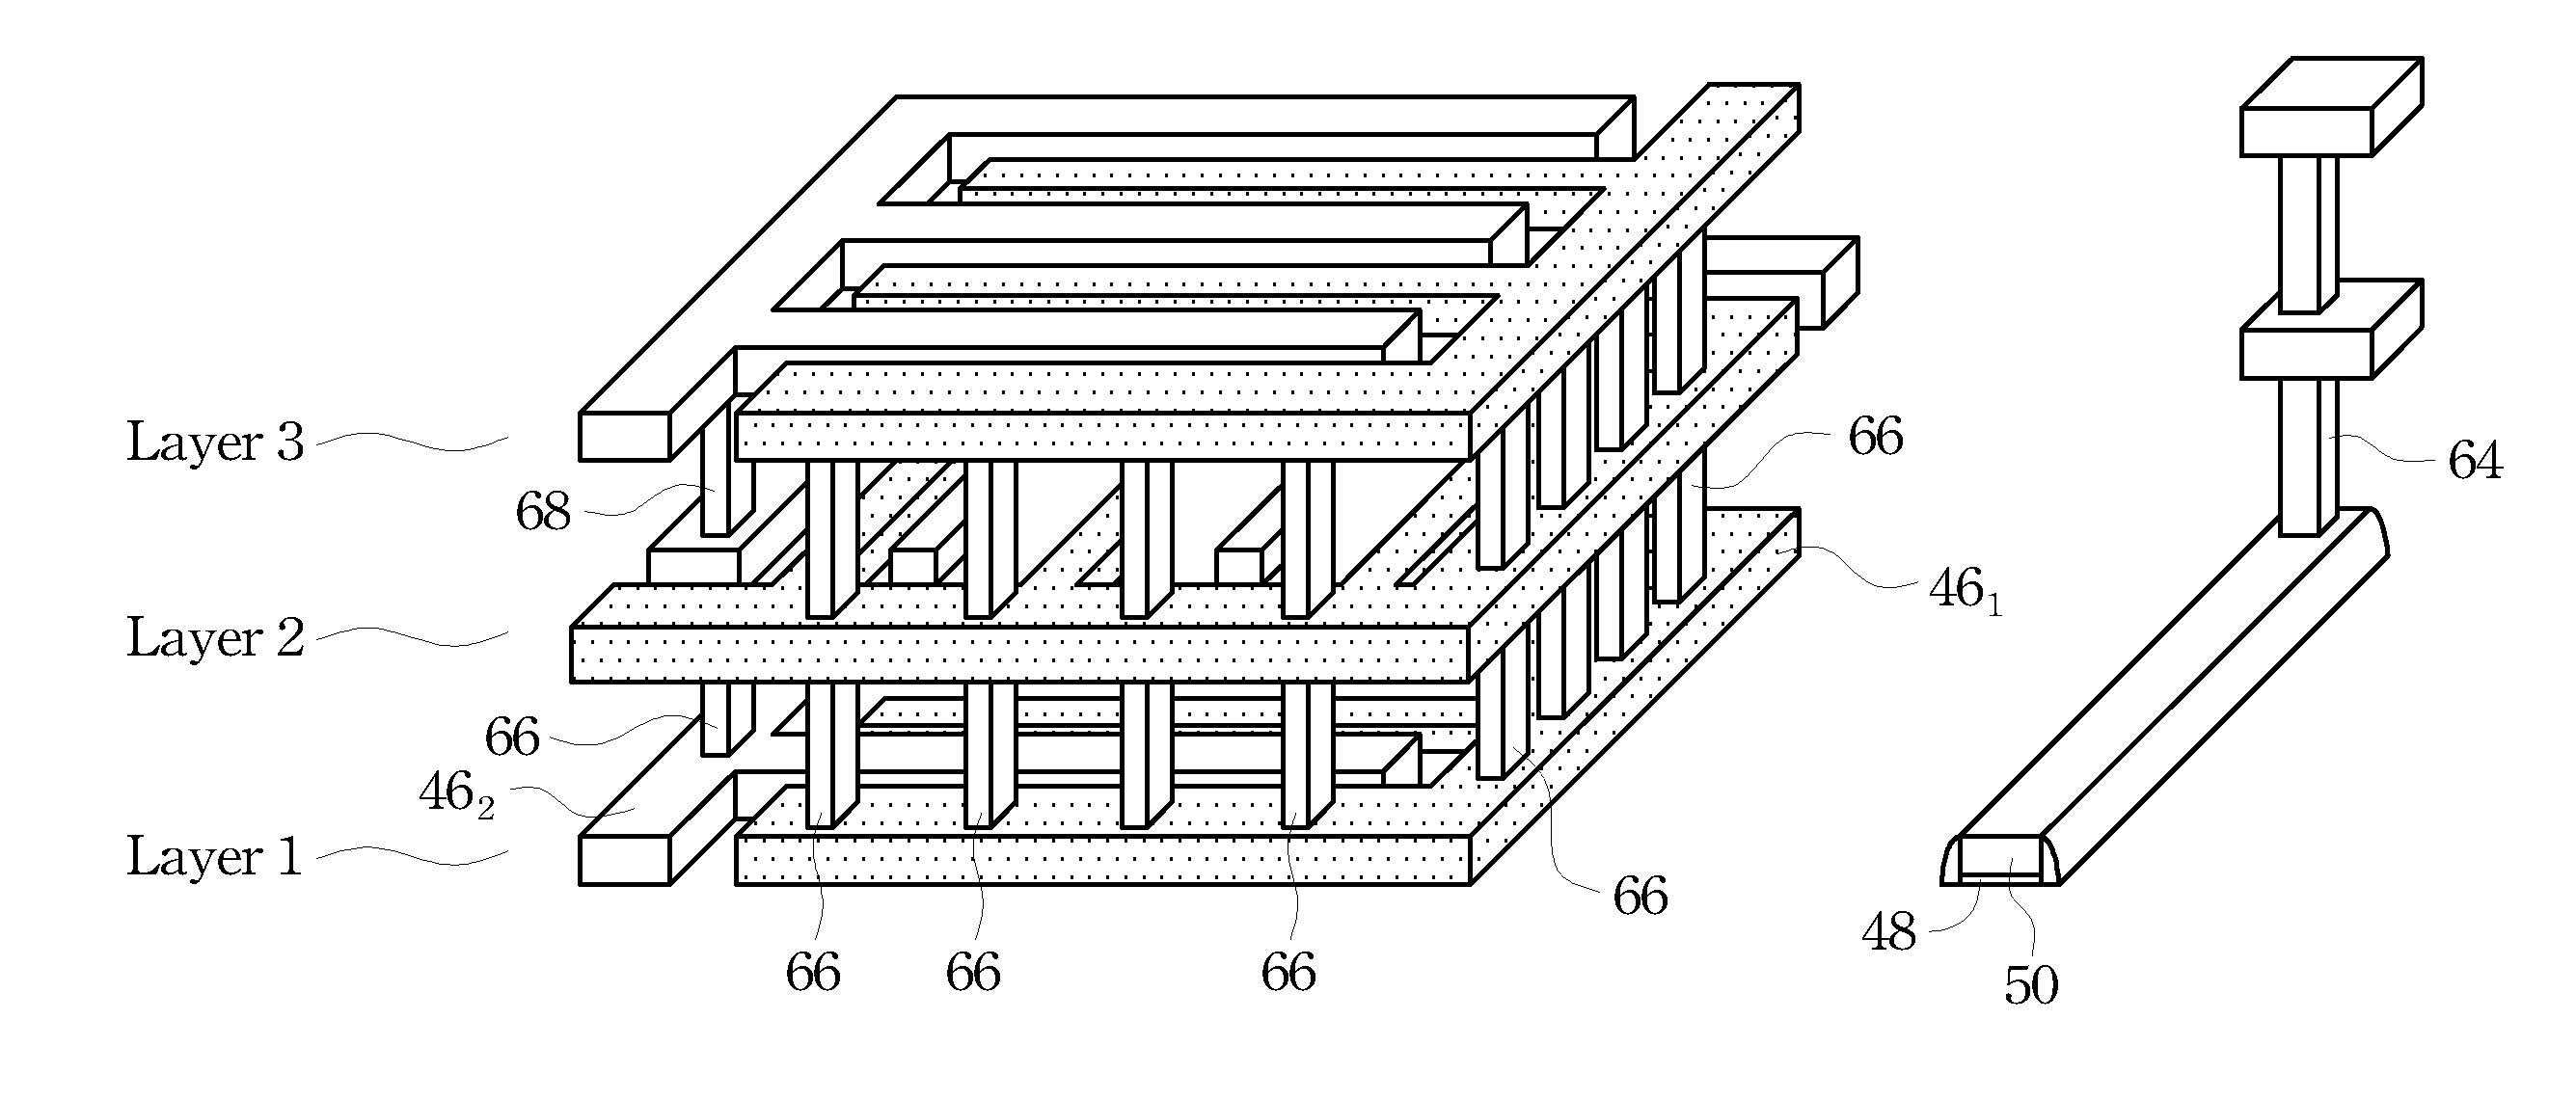 Capacitors Integrated with Metal Gate Formation